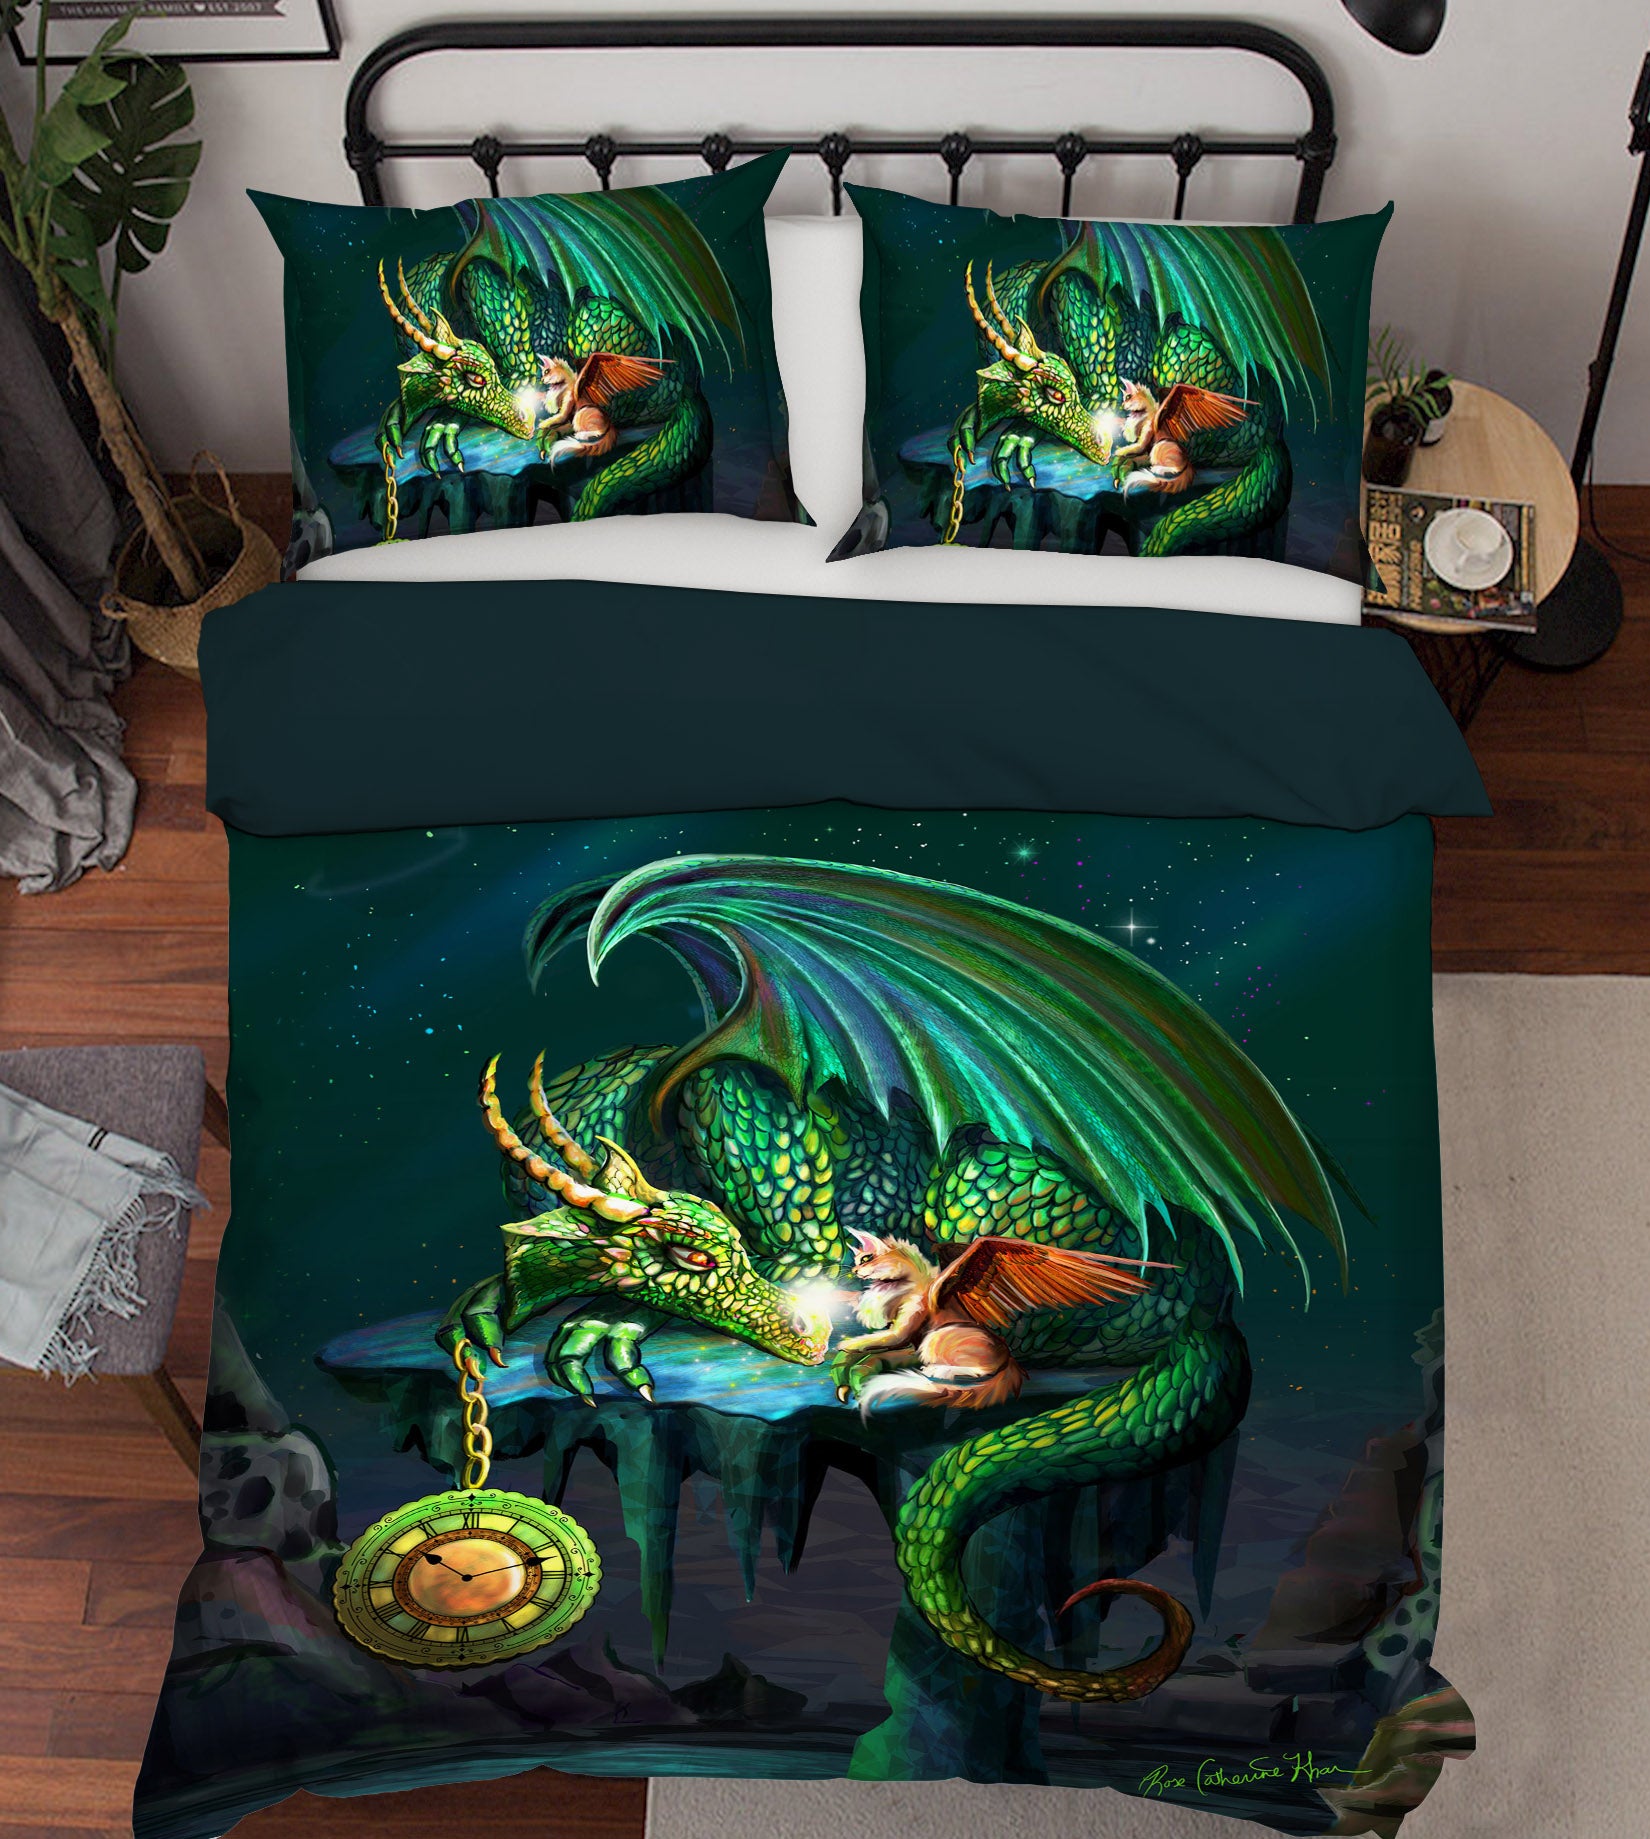 3D Flying Dragon 126 Rose Catherine Khan Bedding Bed Pillowcases Quilt